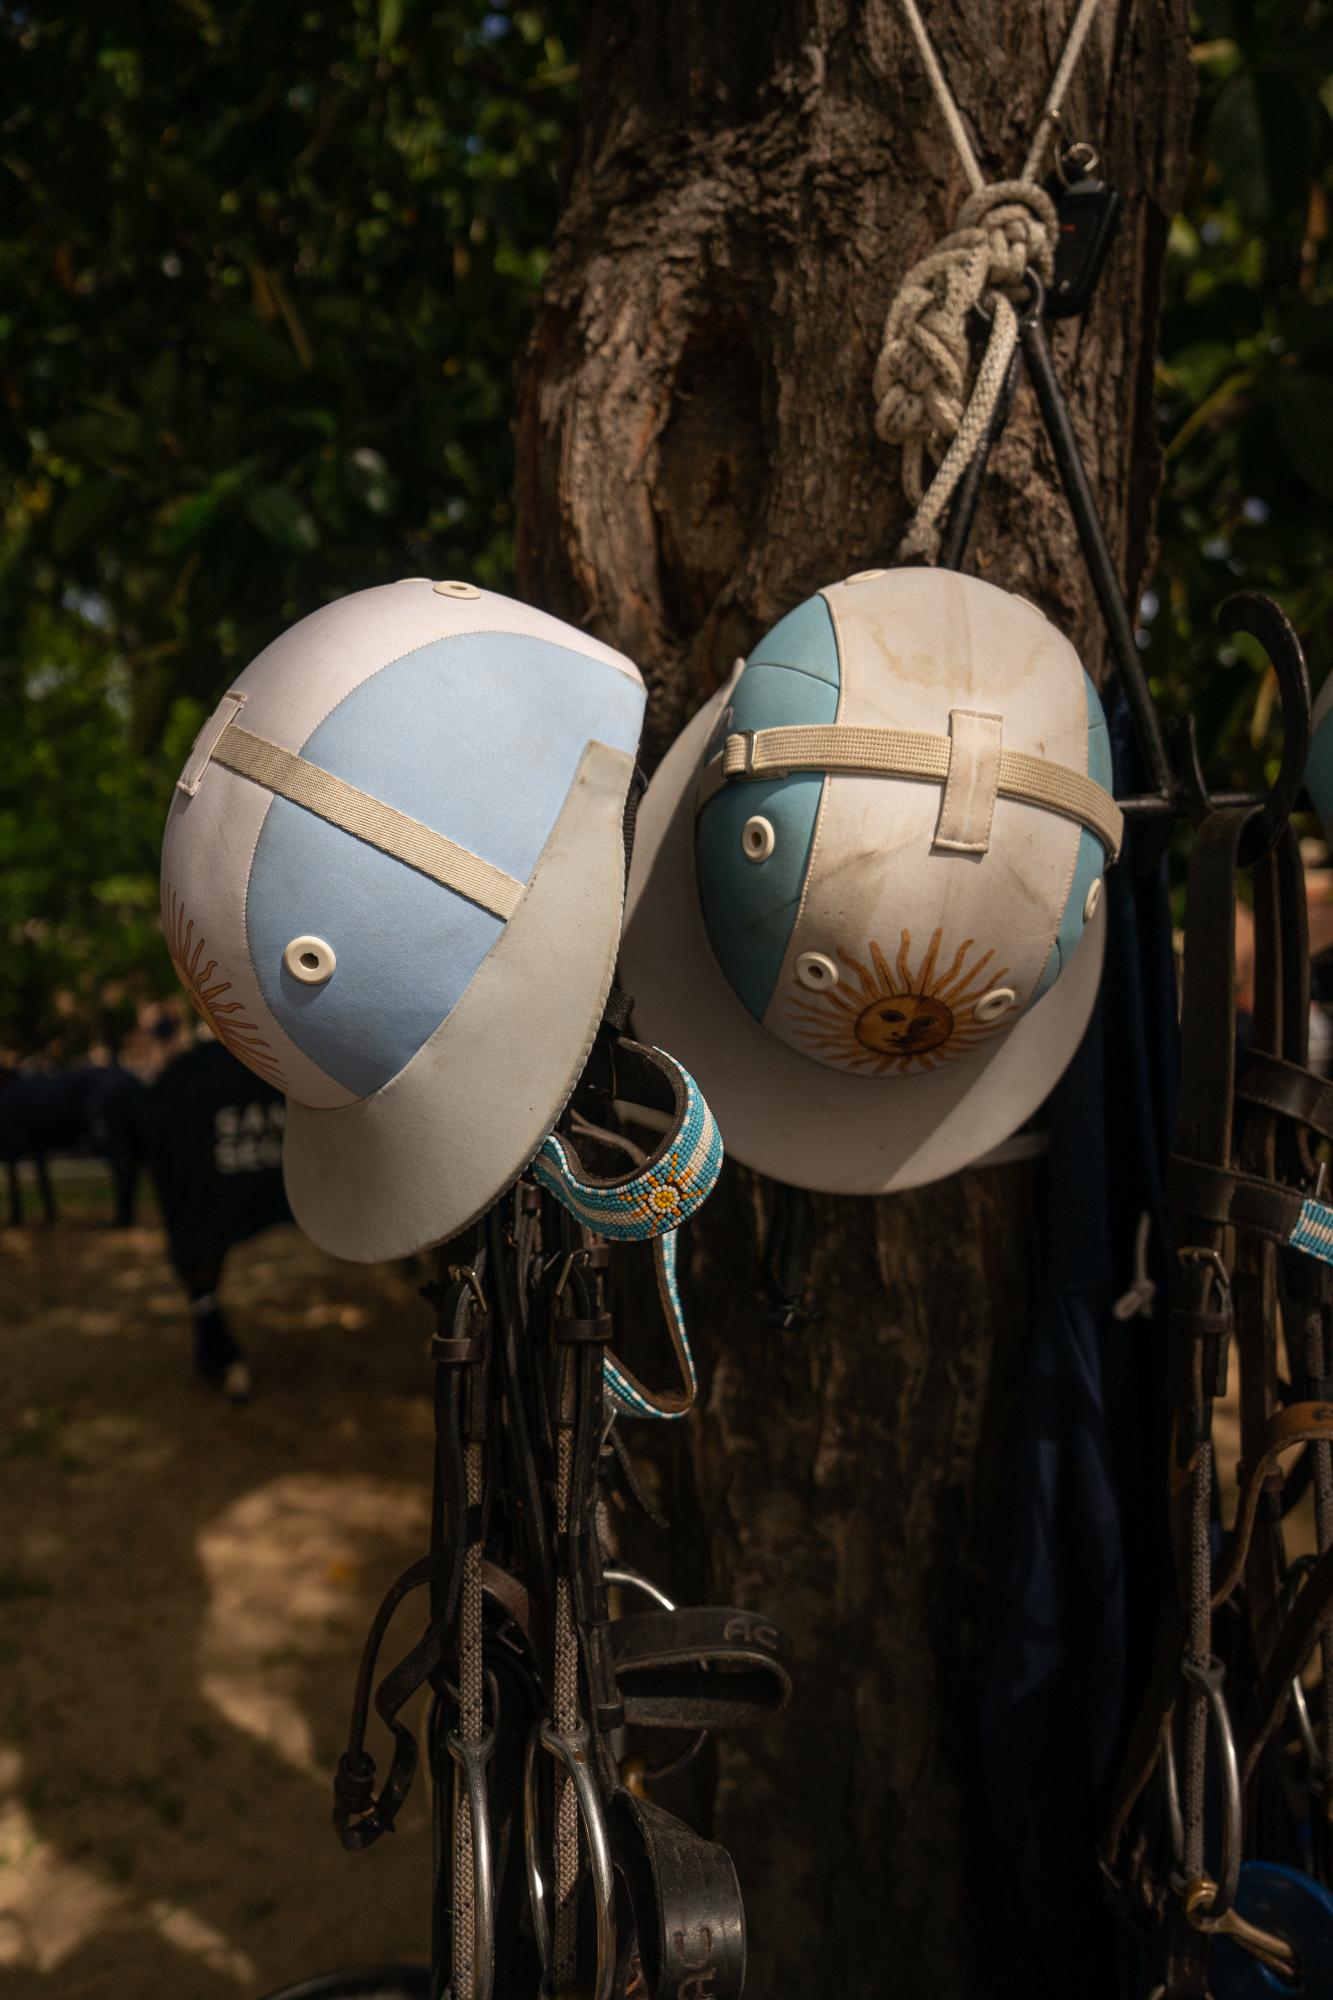 Game of clones - Items used during polo matches in Buenos Aires on...